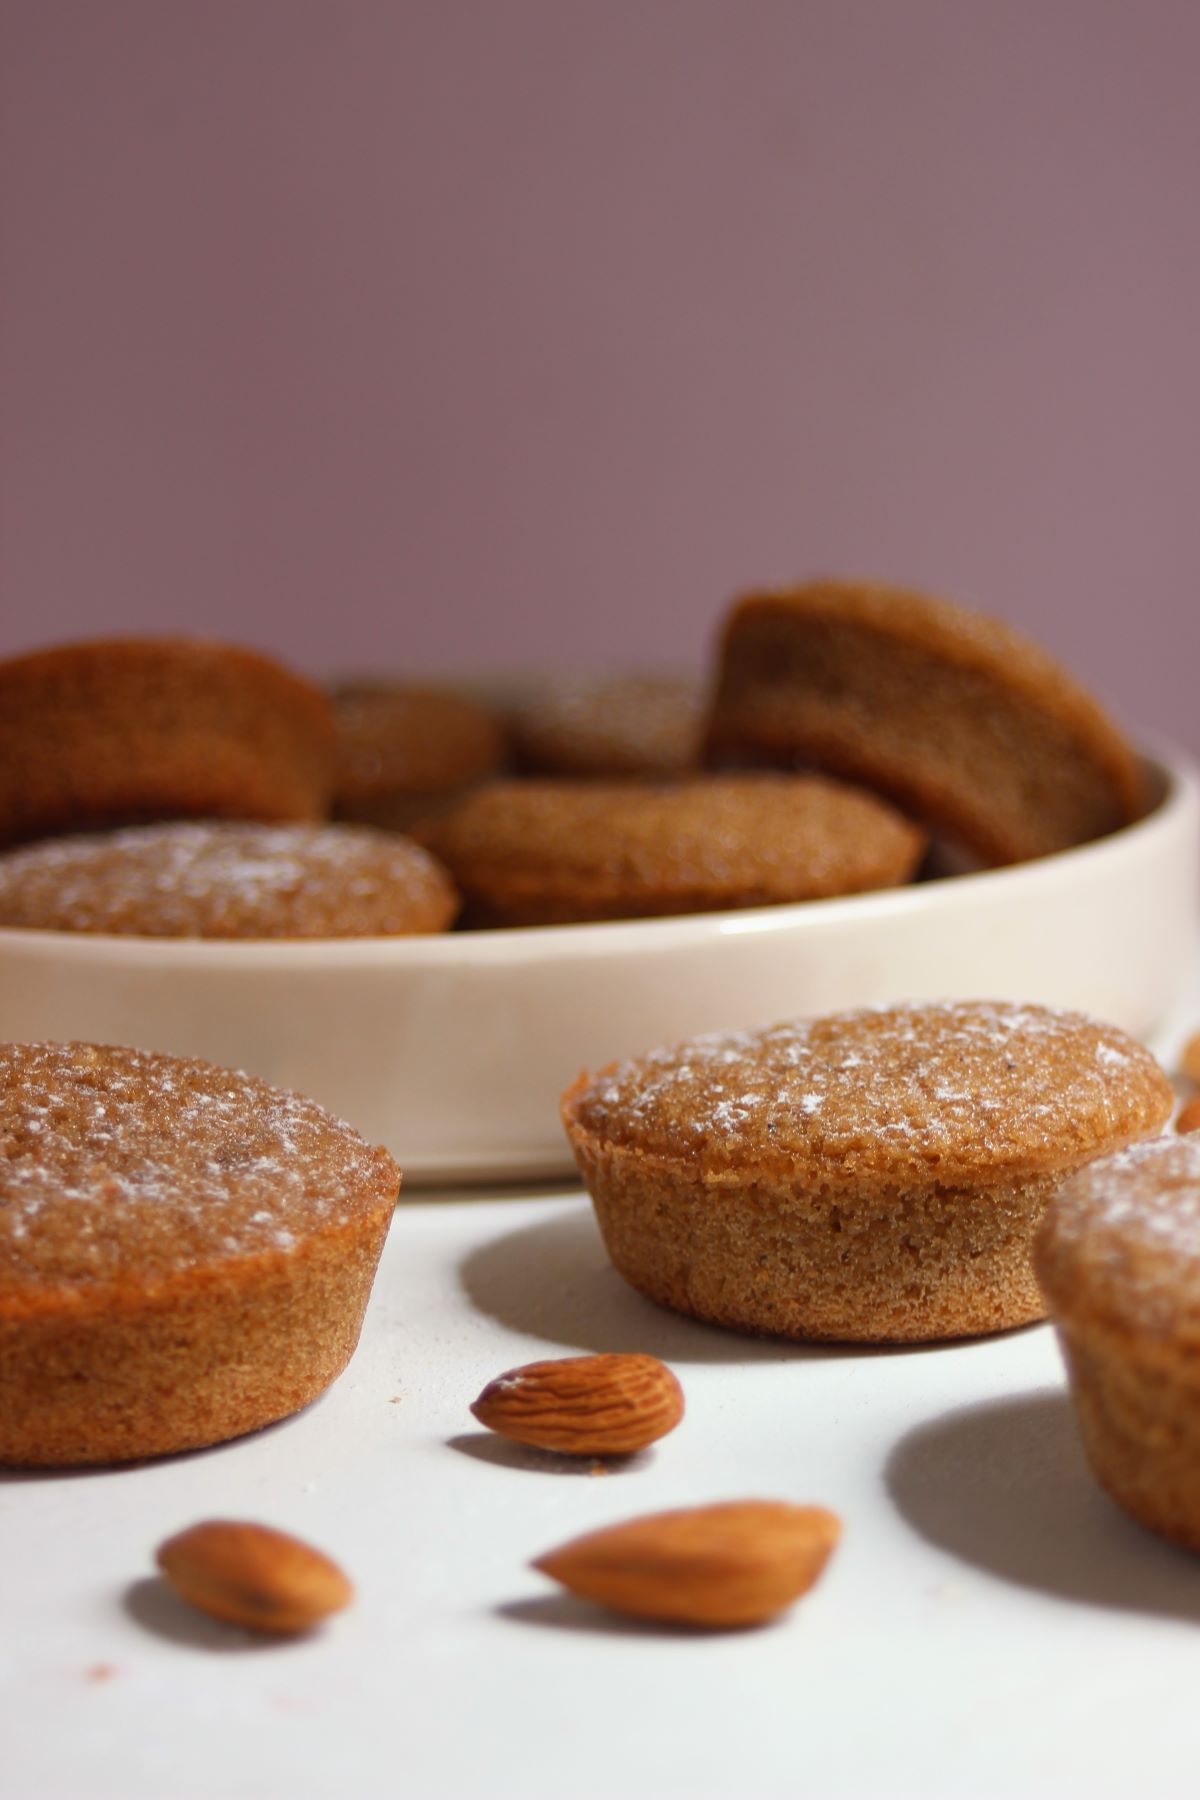 Financiers and almonds on a white surface. Many financiers in the background on a plate.